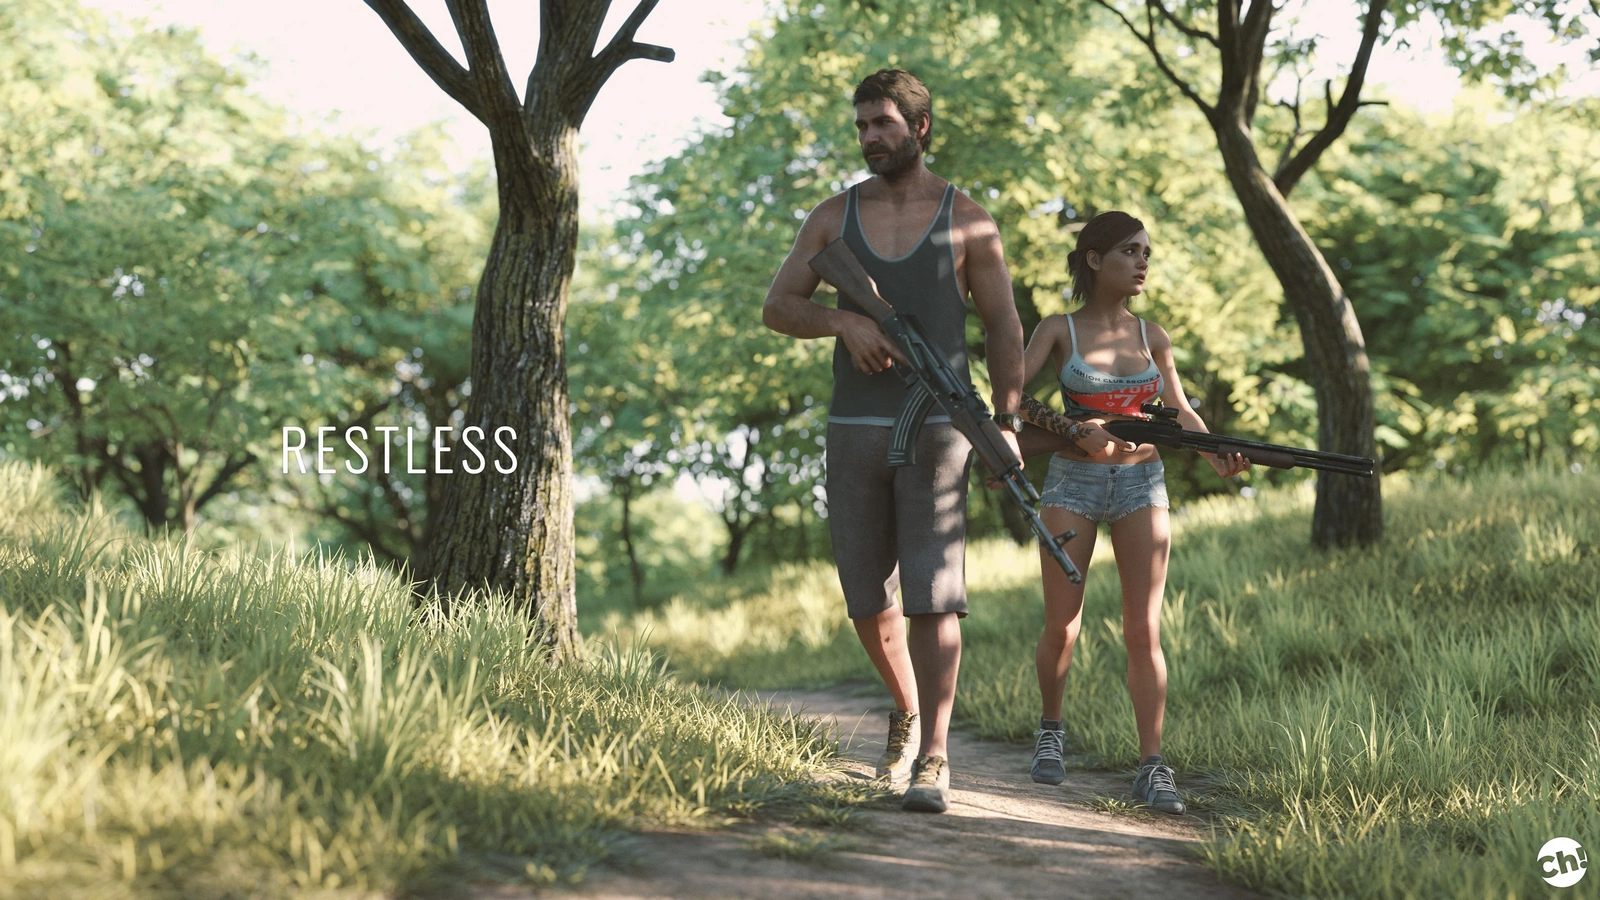 [Chi3DX] The Last Of Us, Restless